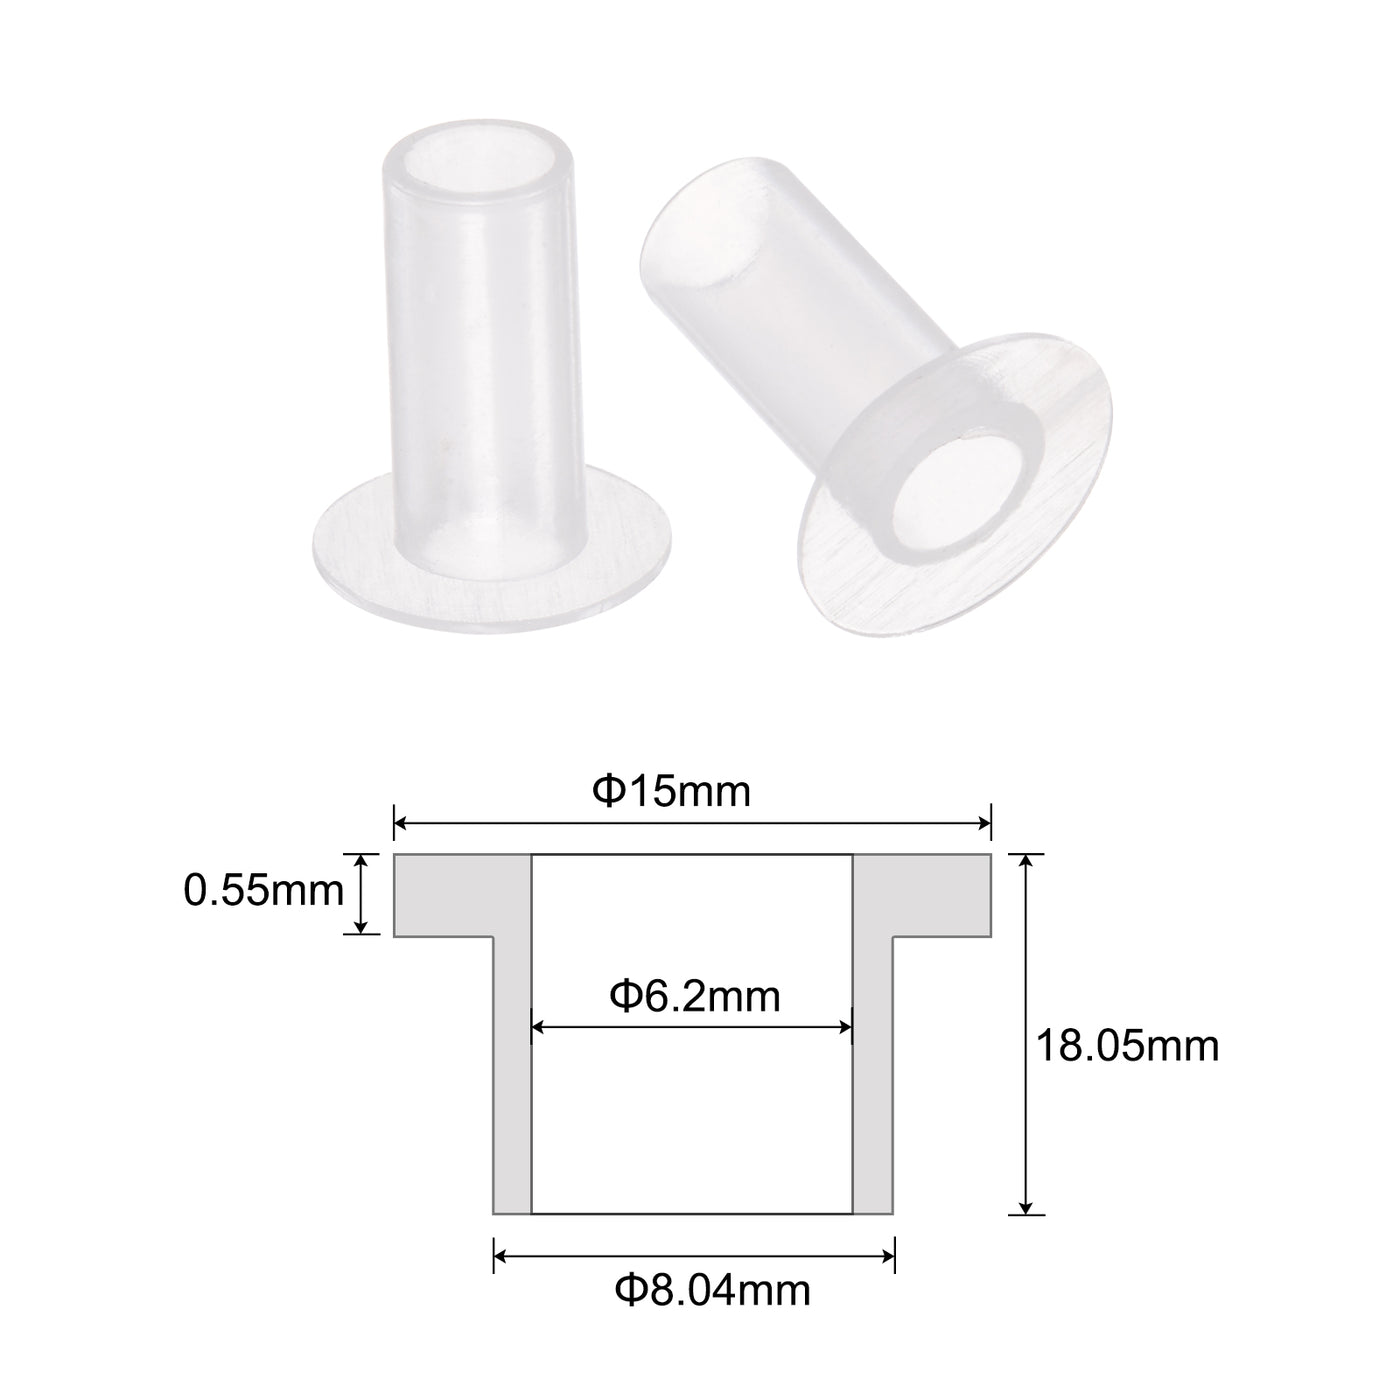 uxcell Uxcell 12pcs Flanged Sleeve Bearings 6.2mm ID 8.04mm OD 18.05mm L, Nylon Bushing White